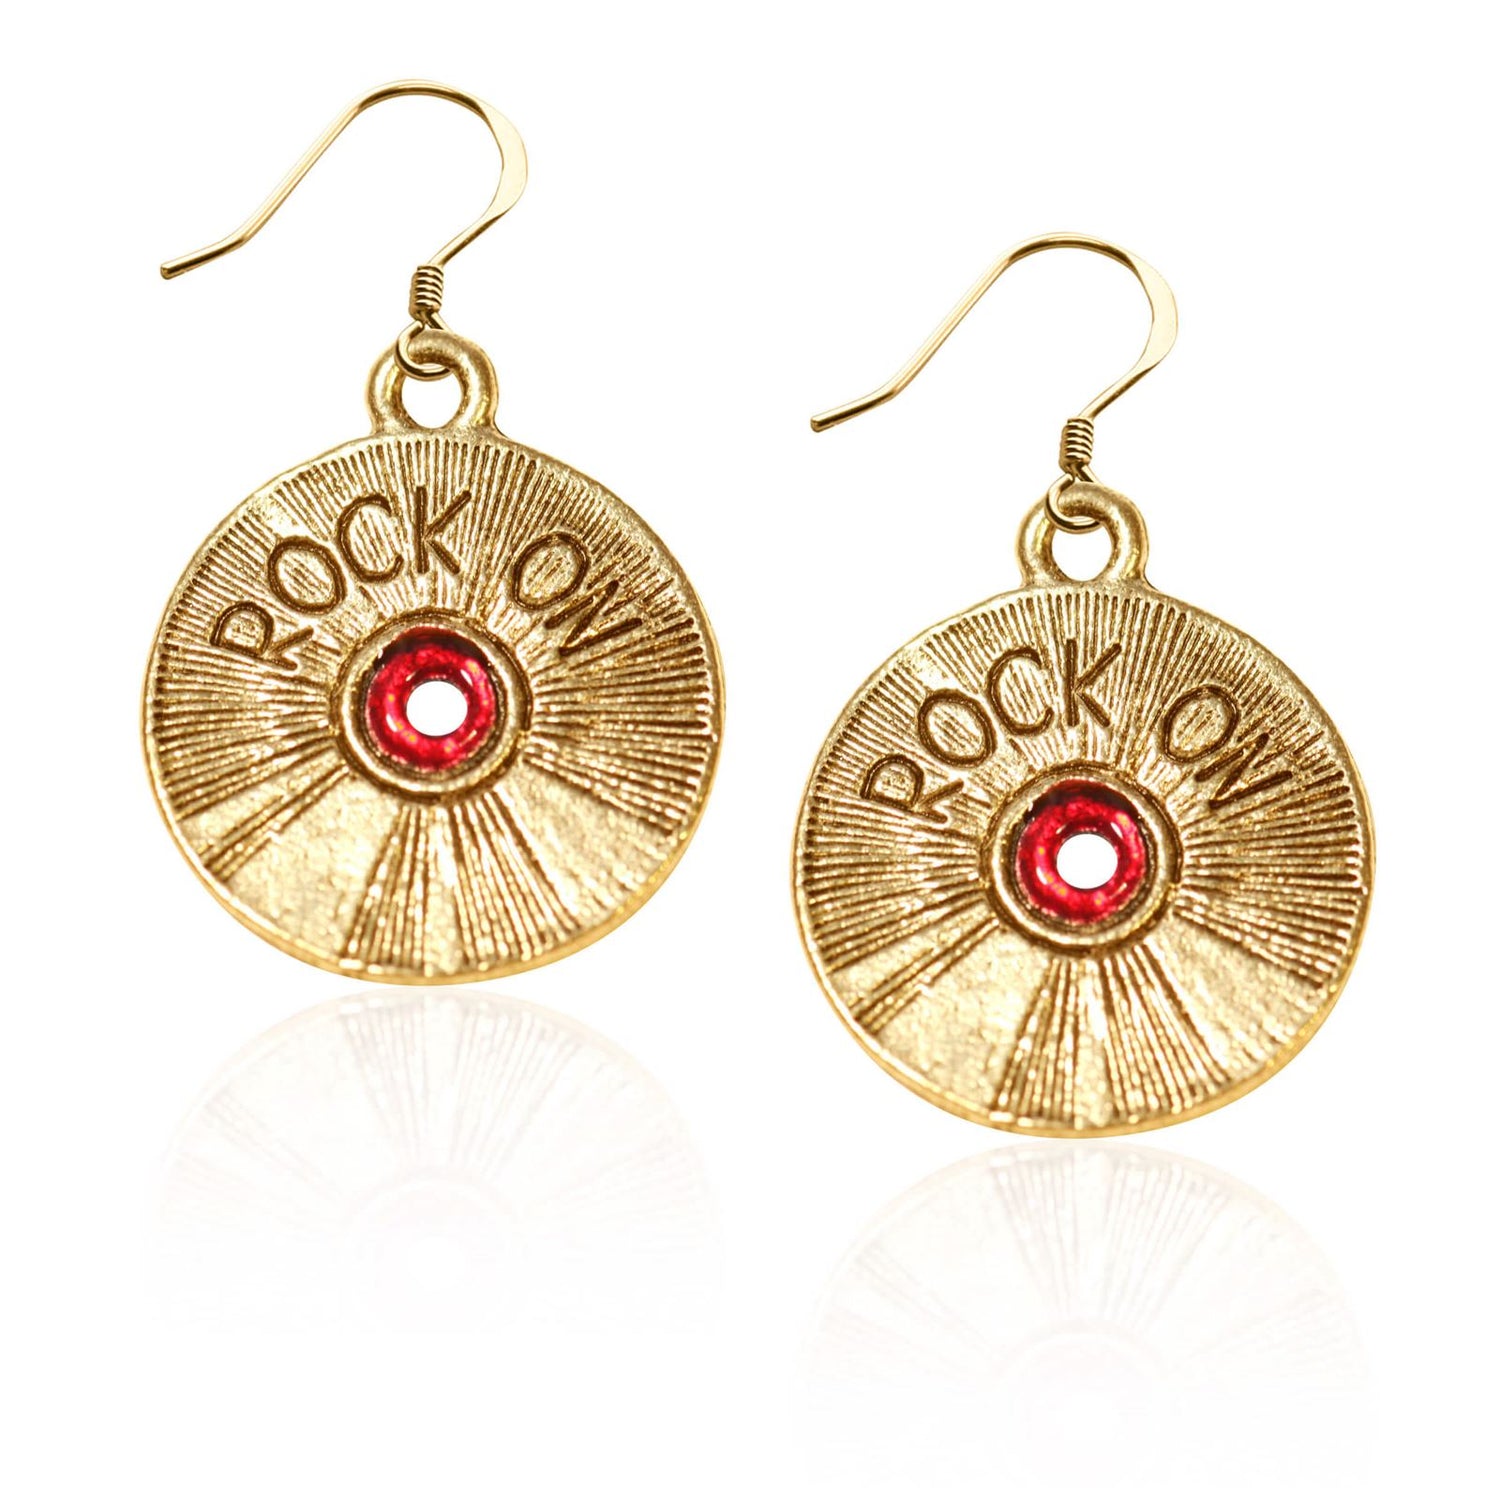 Whimsical Gifts | Rock On | Disco Diva CD Charm Earrings in Gold Finish | Hobbies & Special Interests | Music | Jewelry